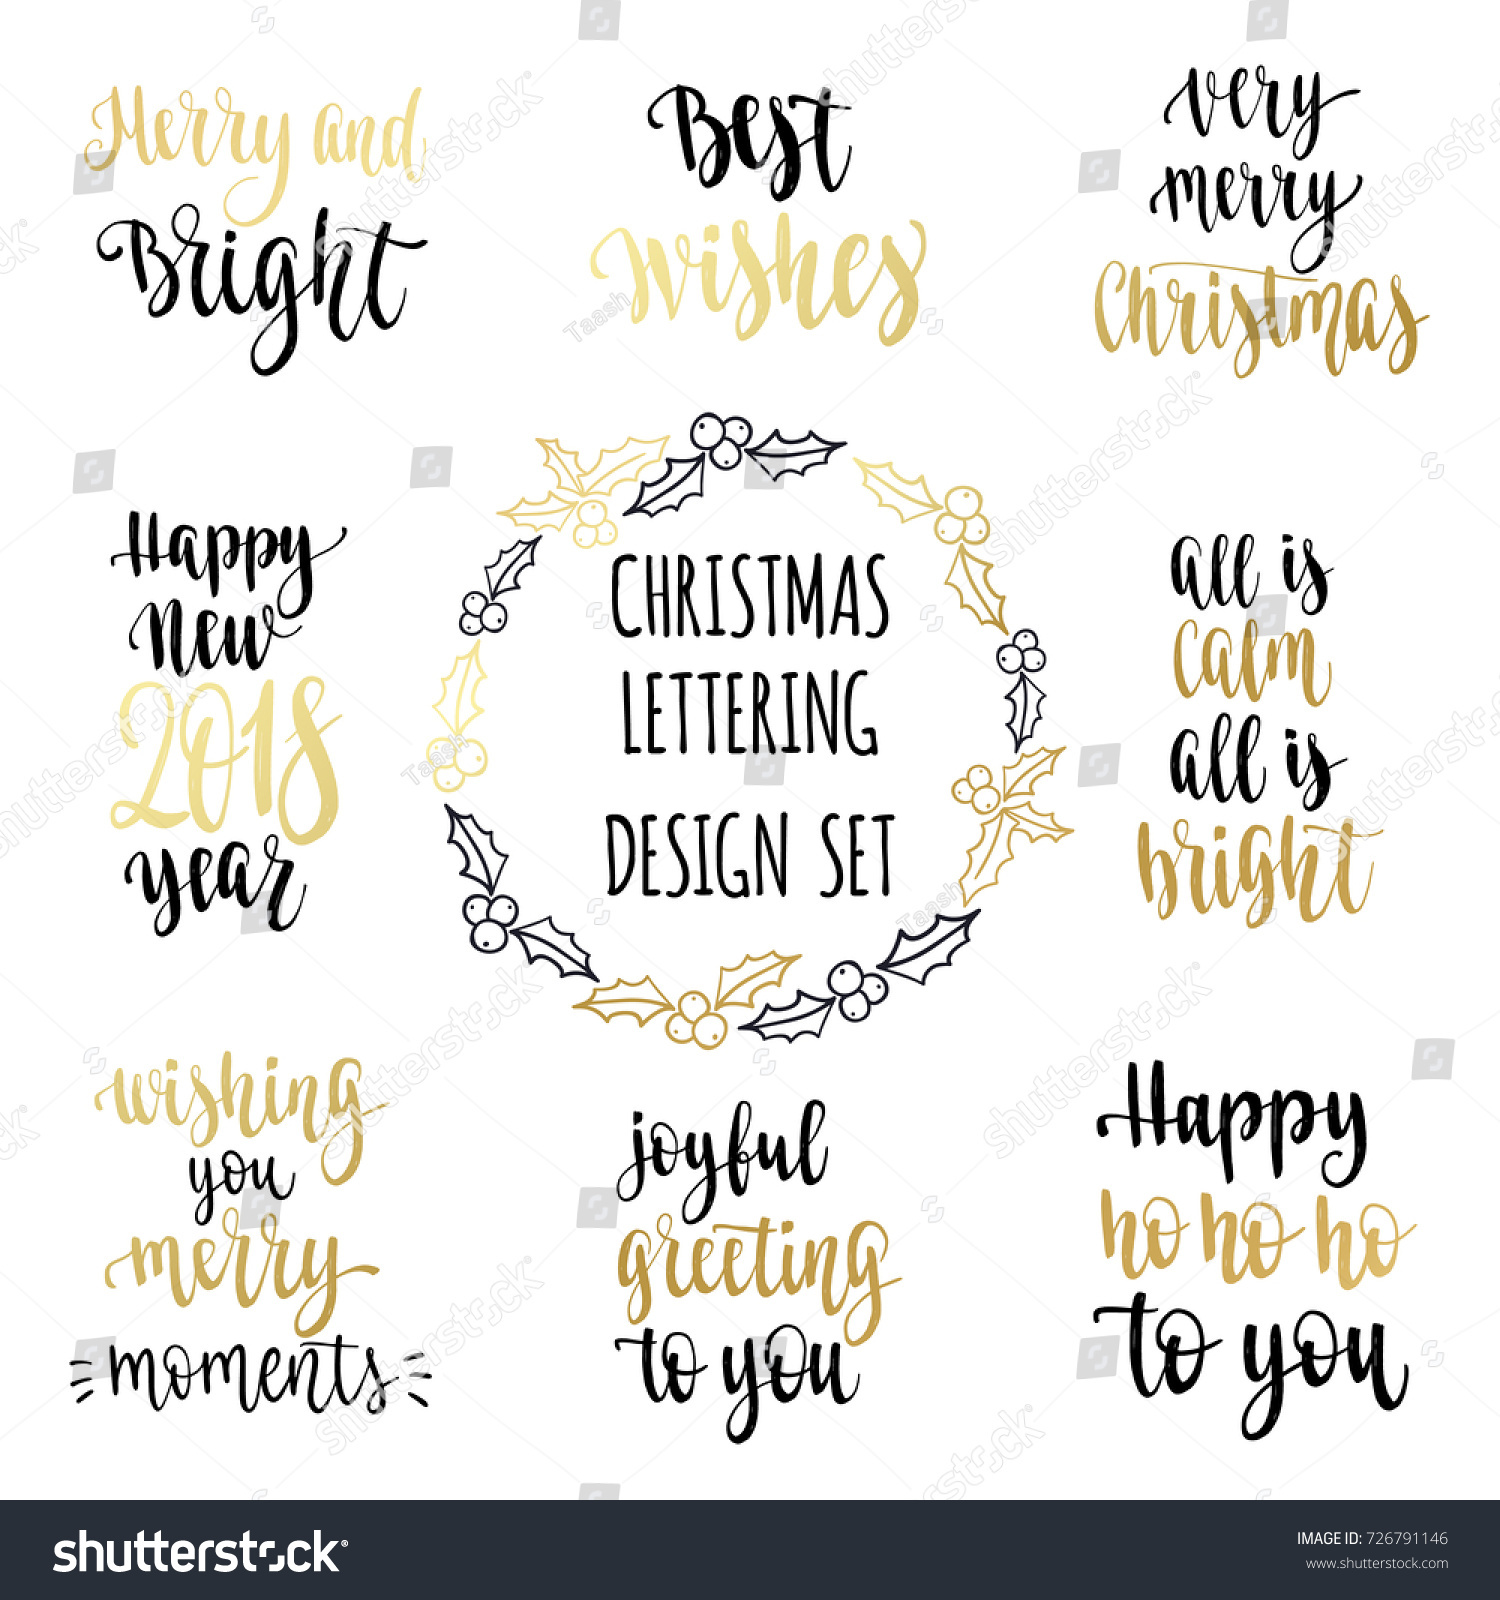 Merry Christmas and Happy New Year lettering set Winter holidays handwritten calligraphy vector illustration for